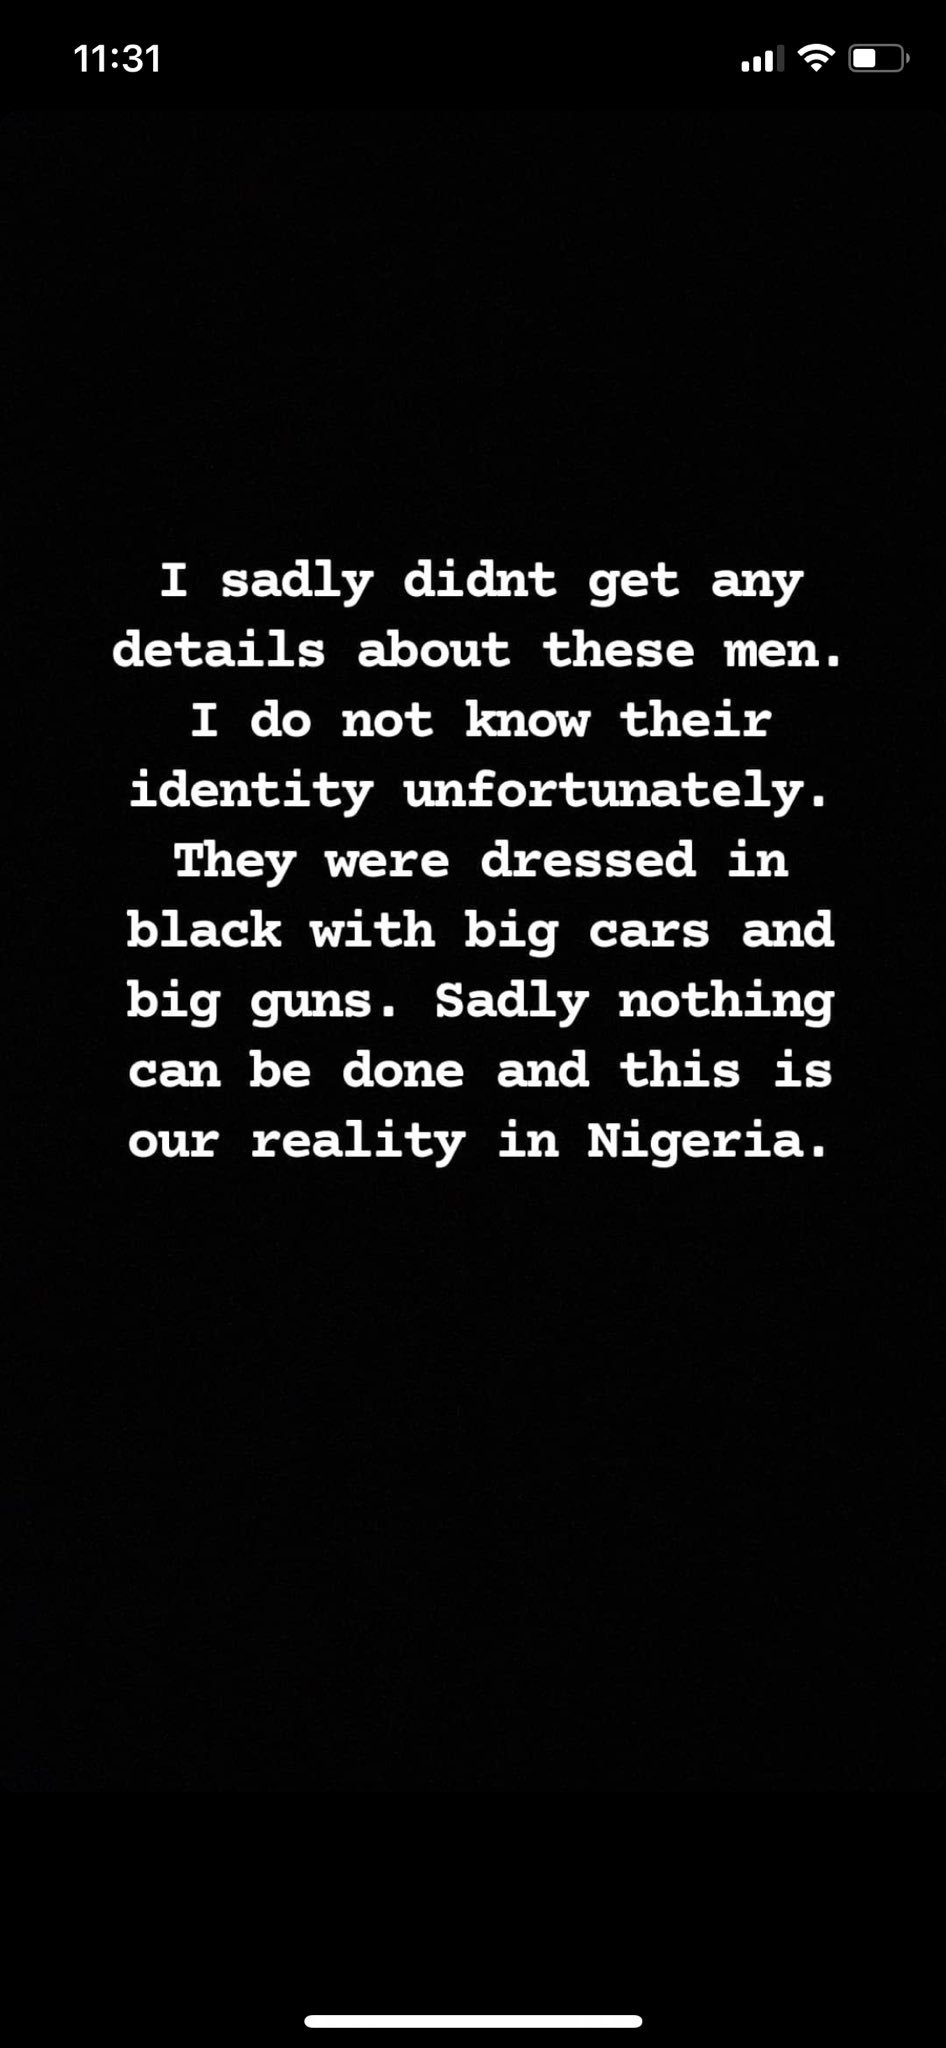 Lady and her friends kidnapped by SARS